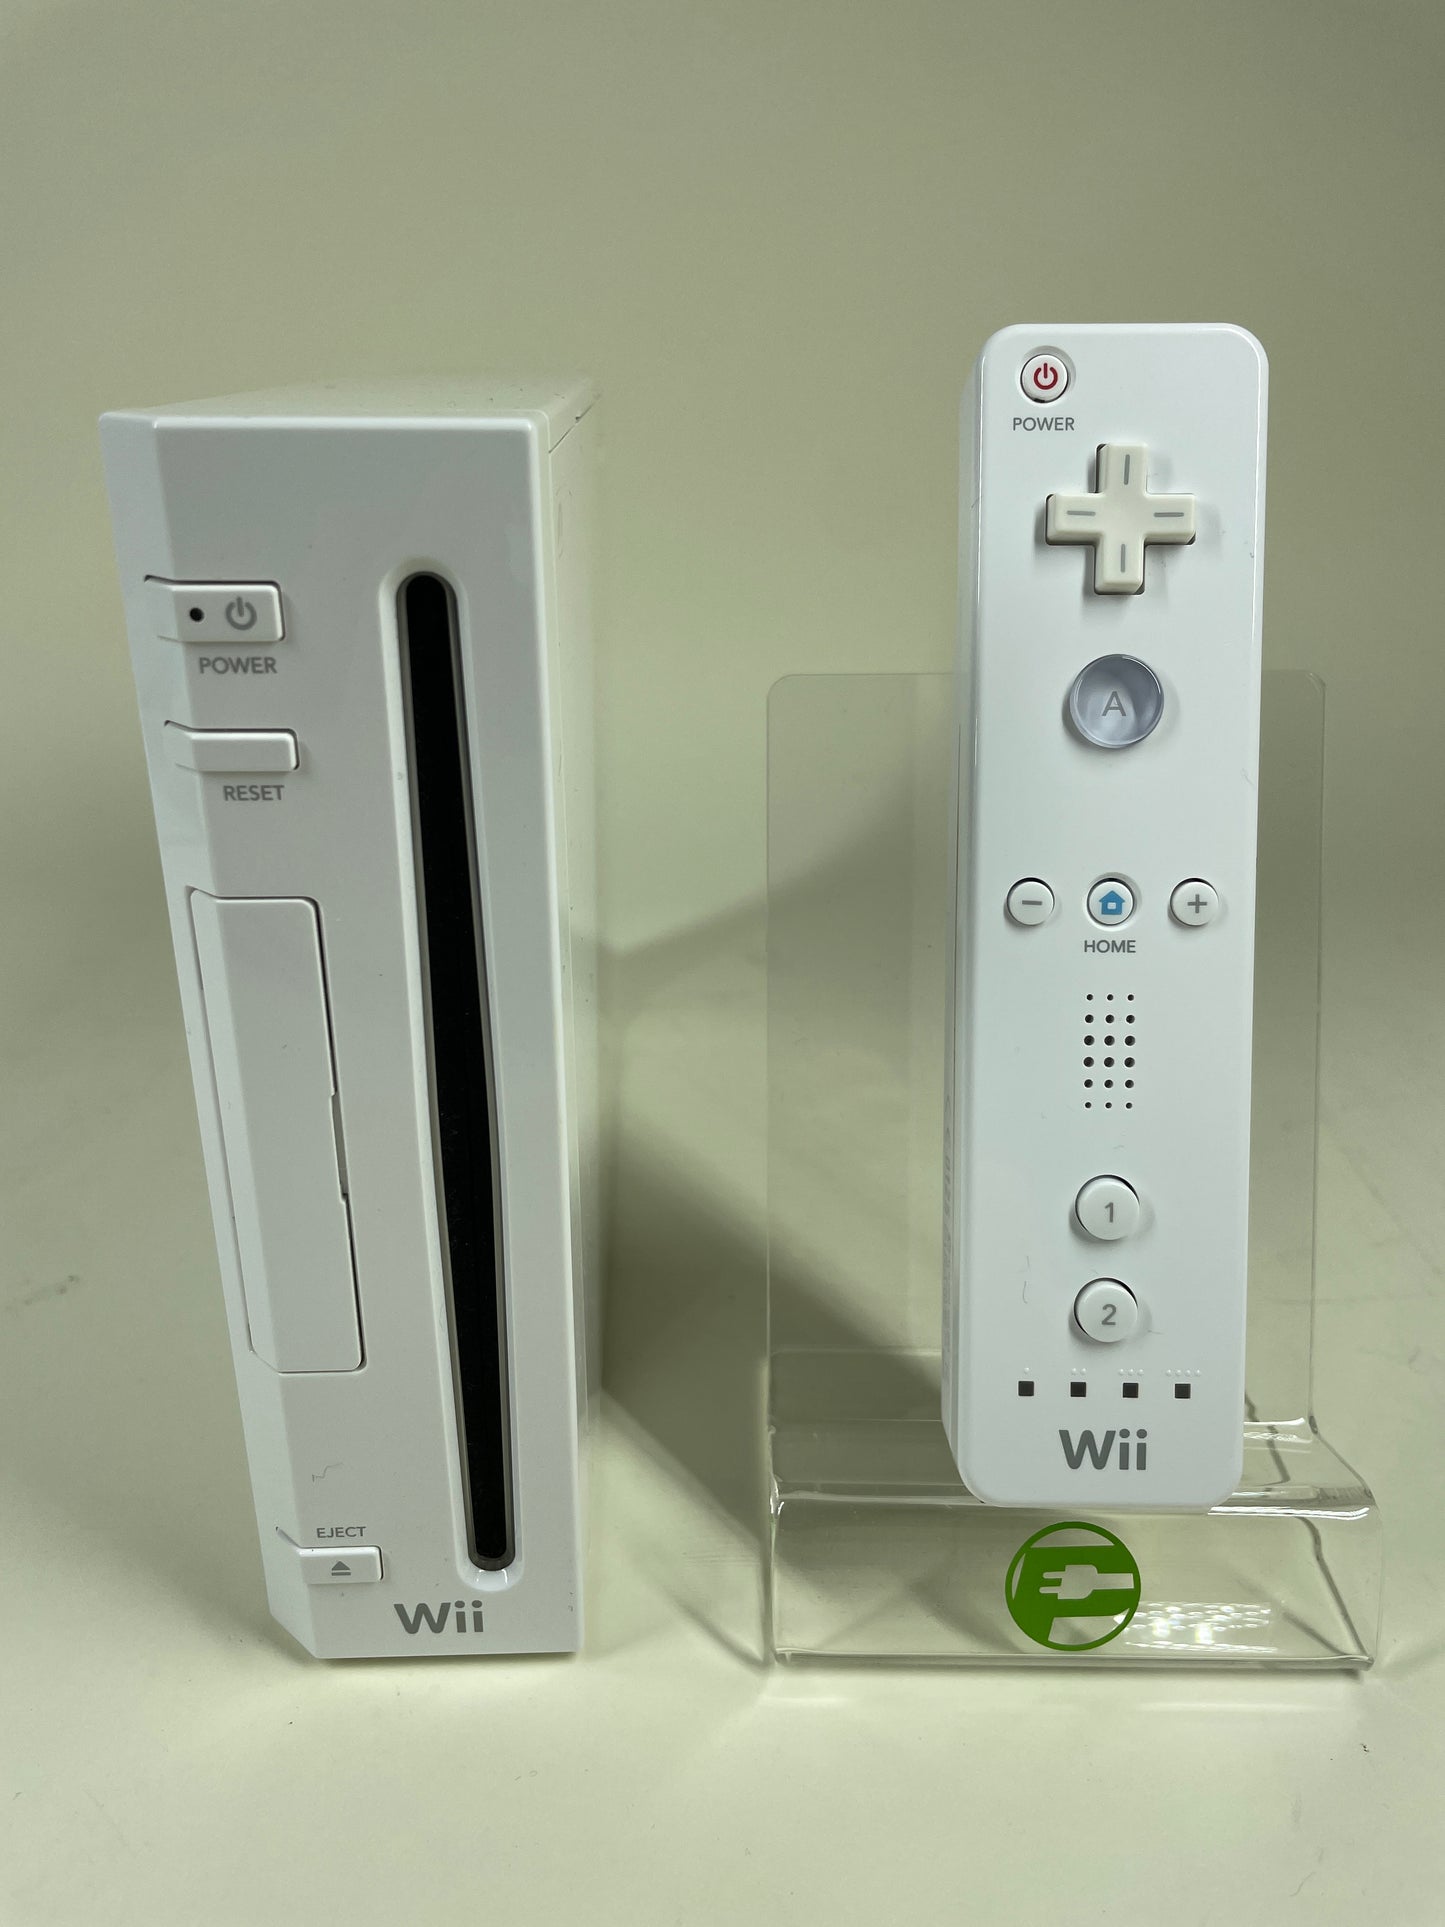 Nintendo Wii Video Game Console White